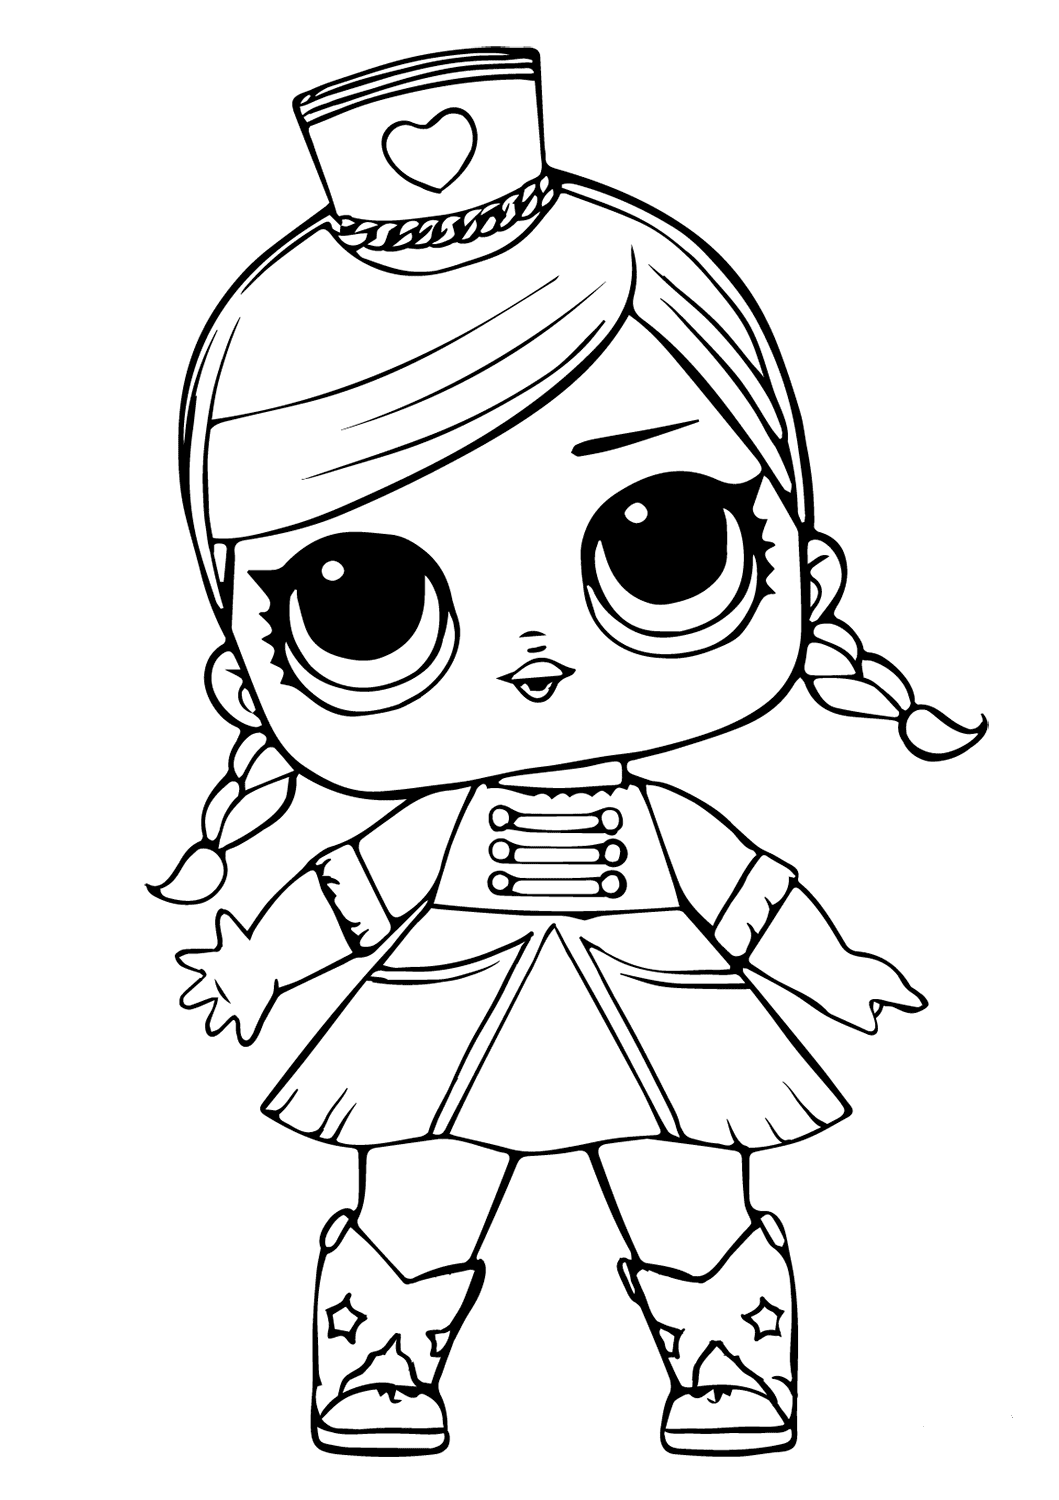 Cute Coloring Pages For Kids Lol for Kids